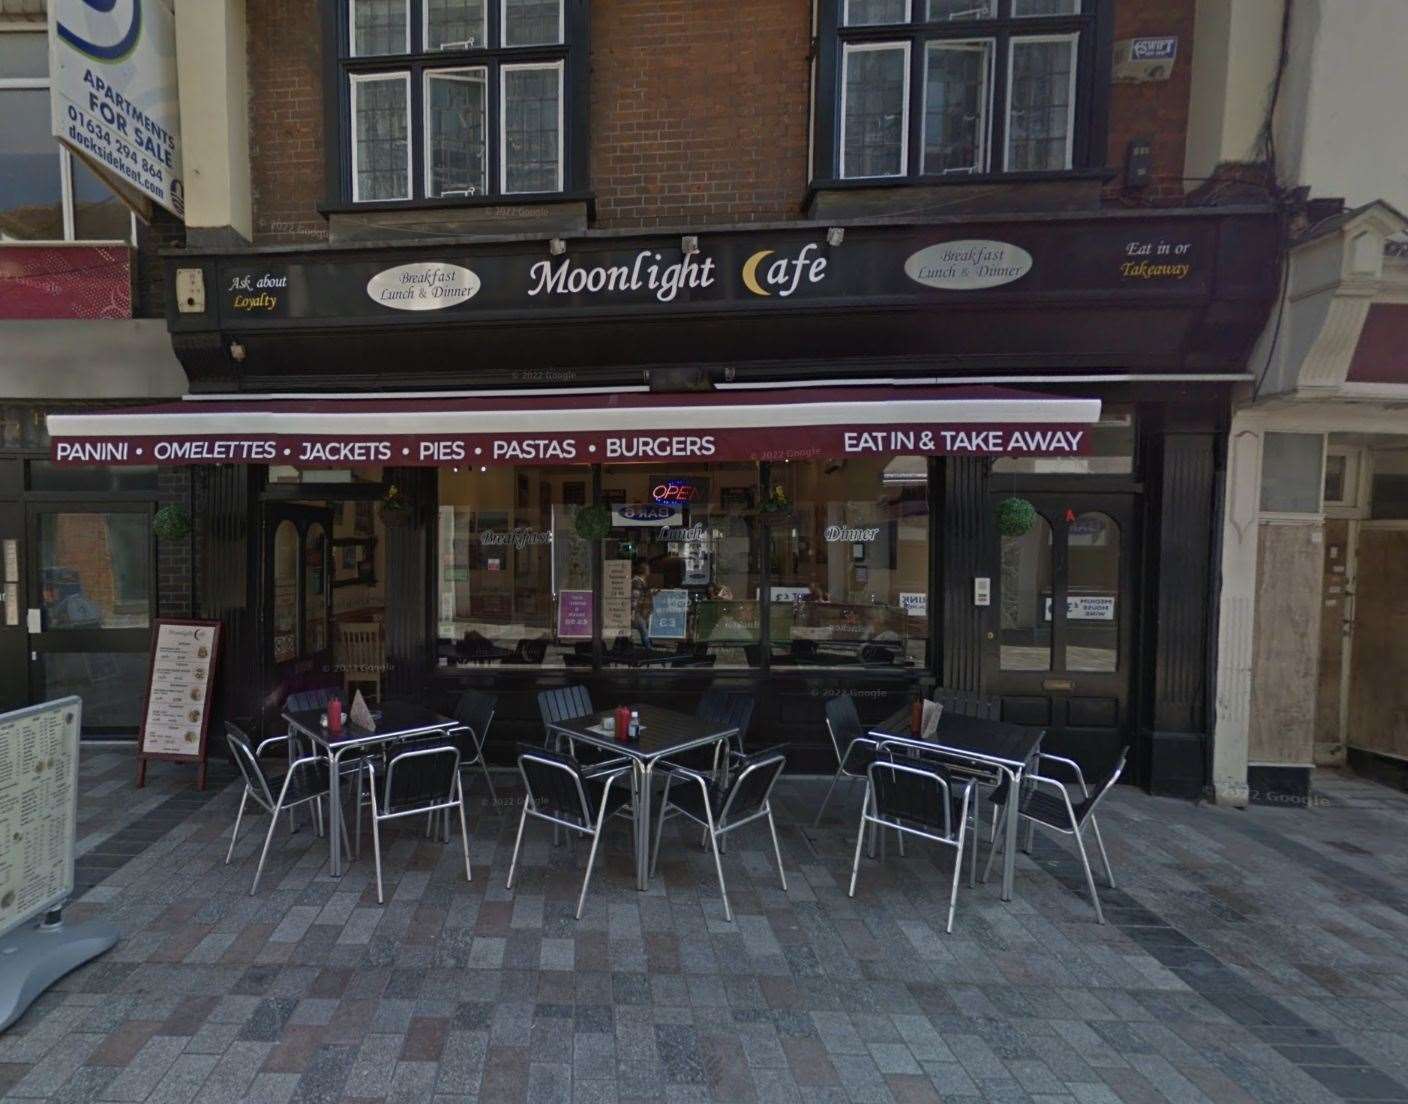 Moonlight Cafe in Maidstone offers tasty food at reasonable prices. Picture: Google Maps